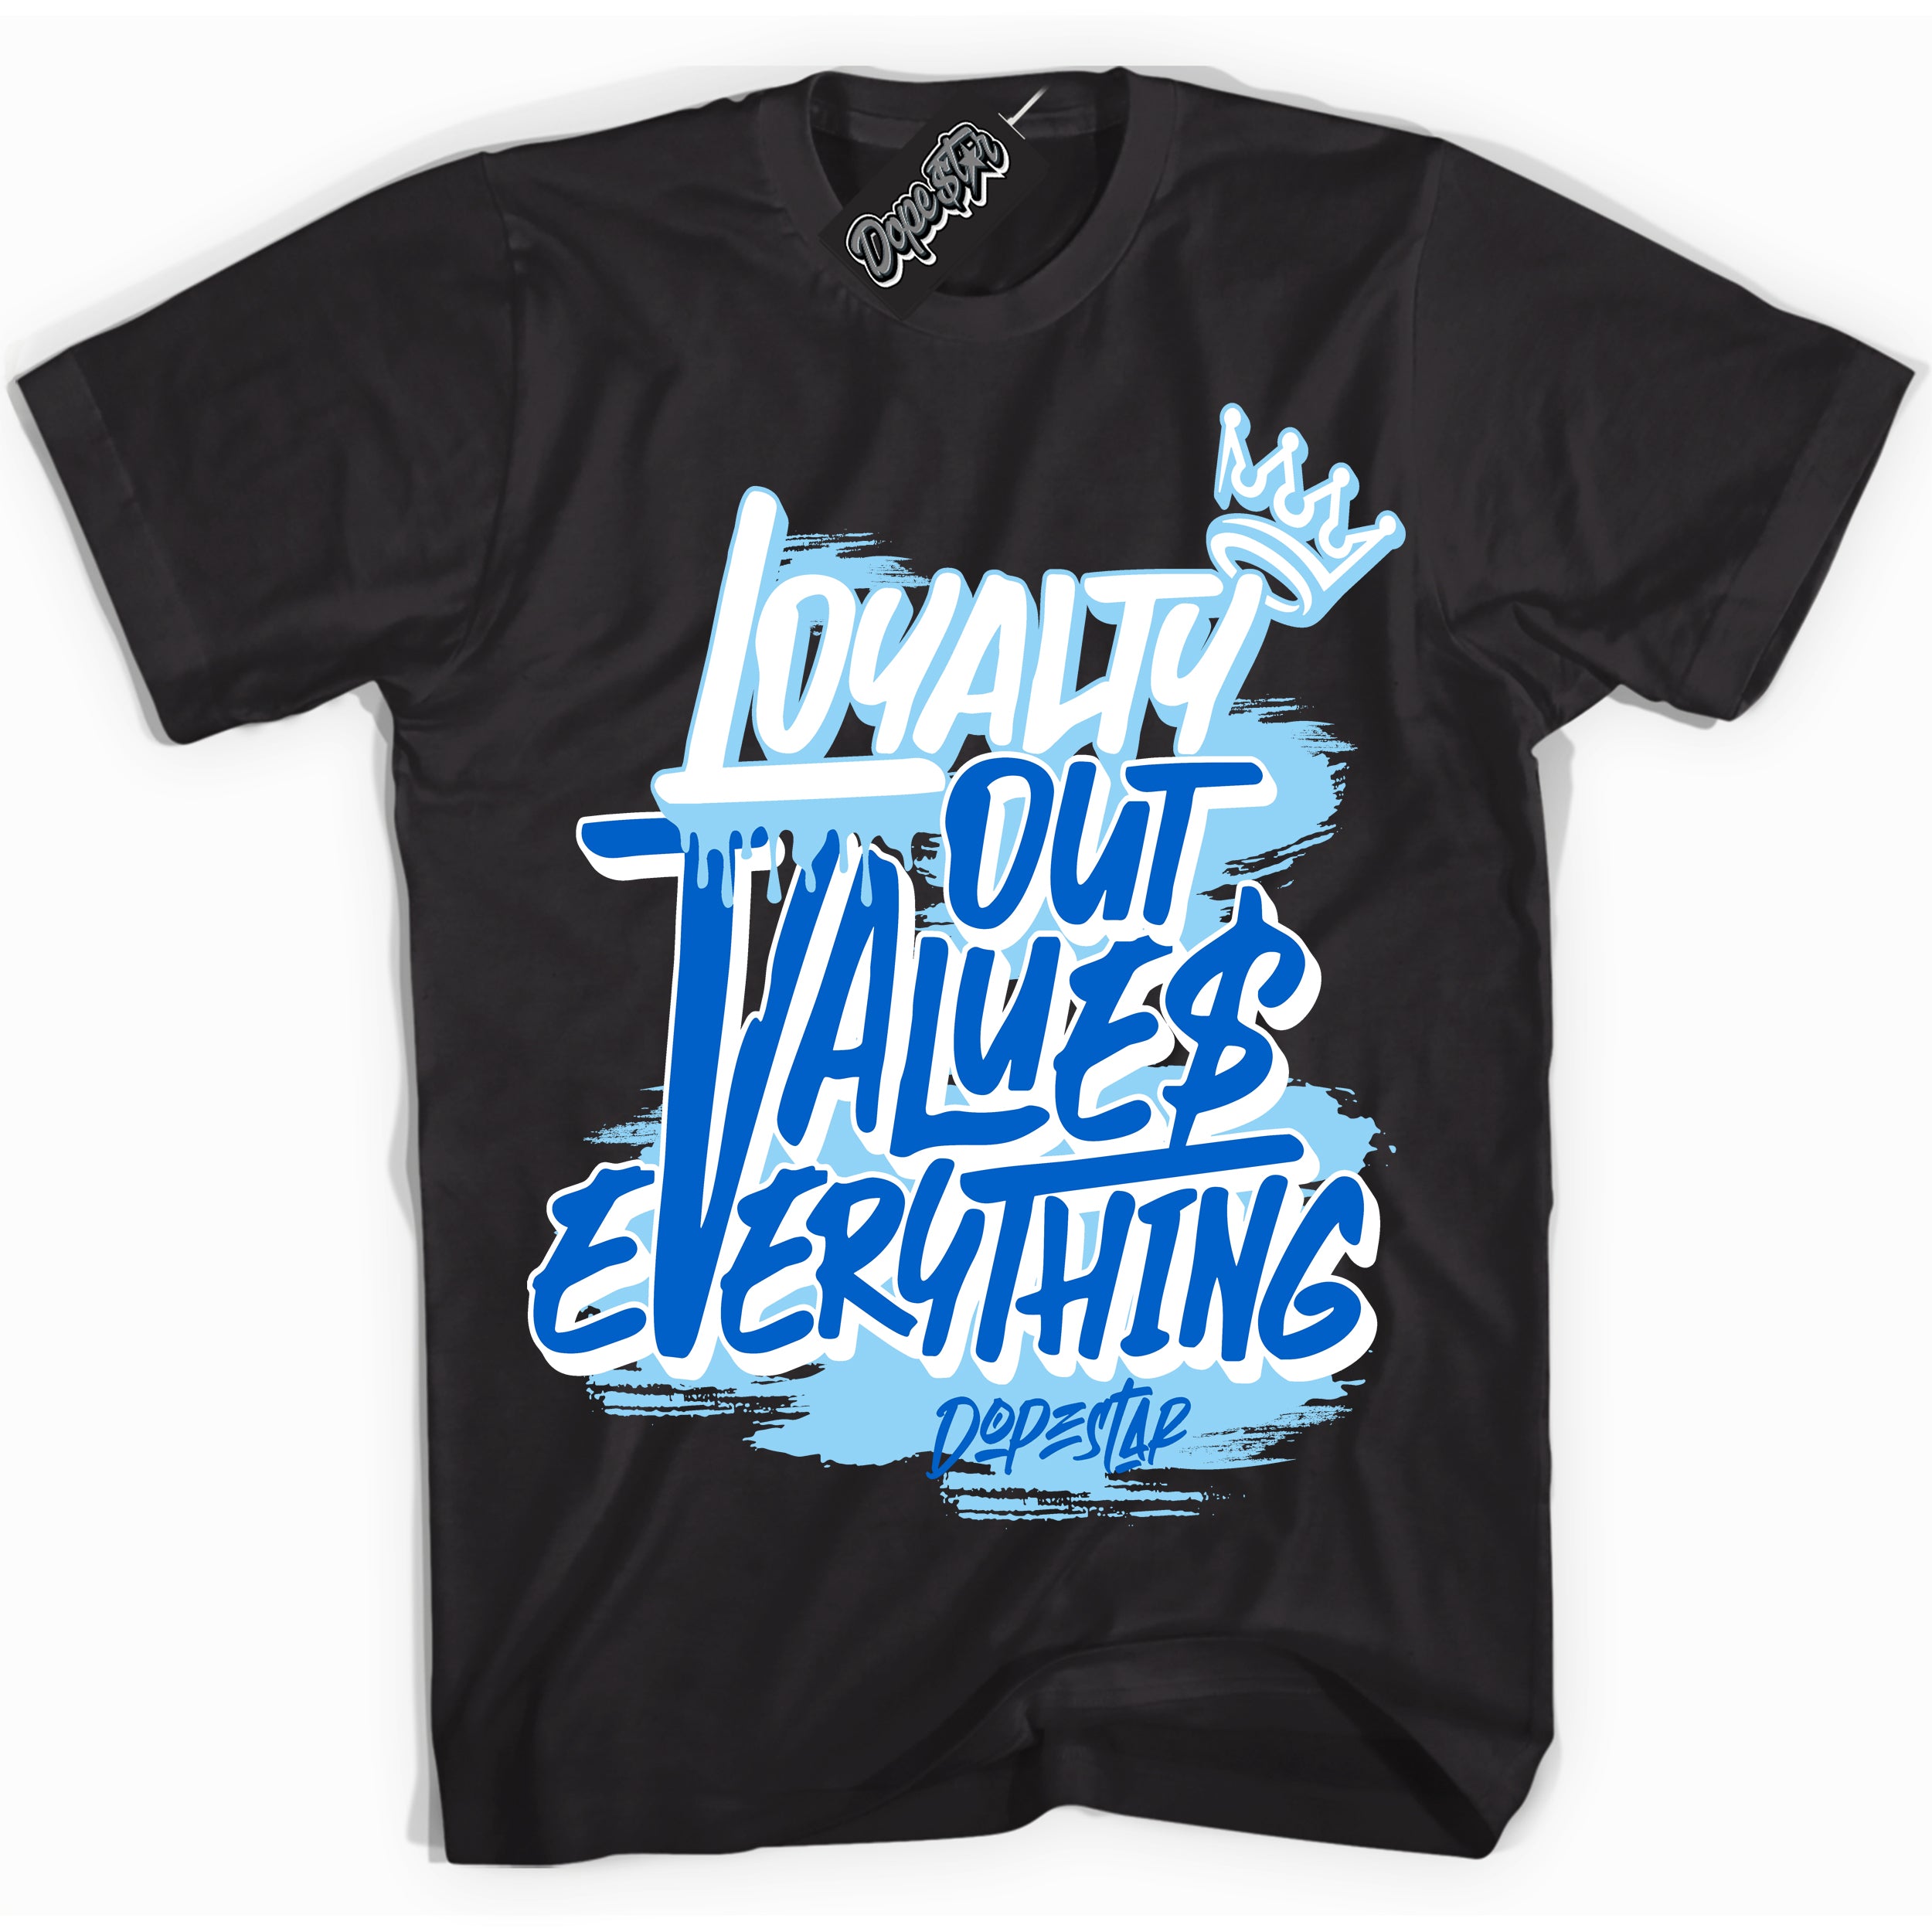 Cool Black Shirt with “ Loyalty Out Values Everything” design that perfectly matches Argon Sneakers.